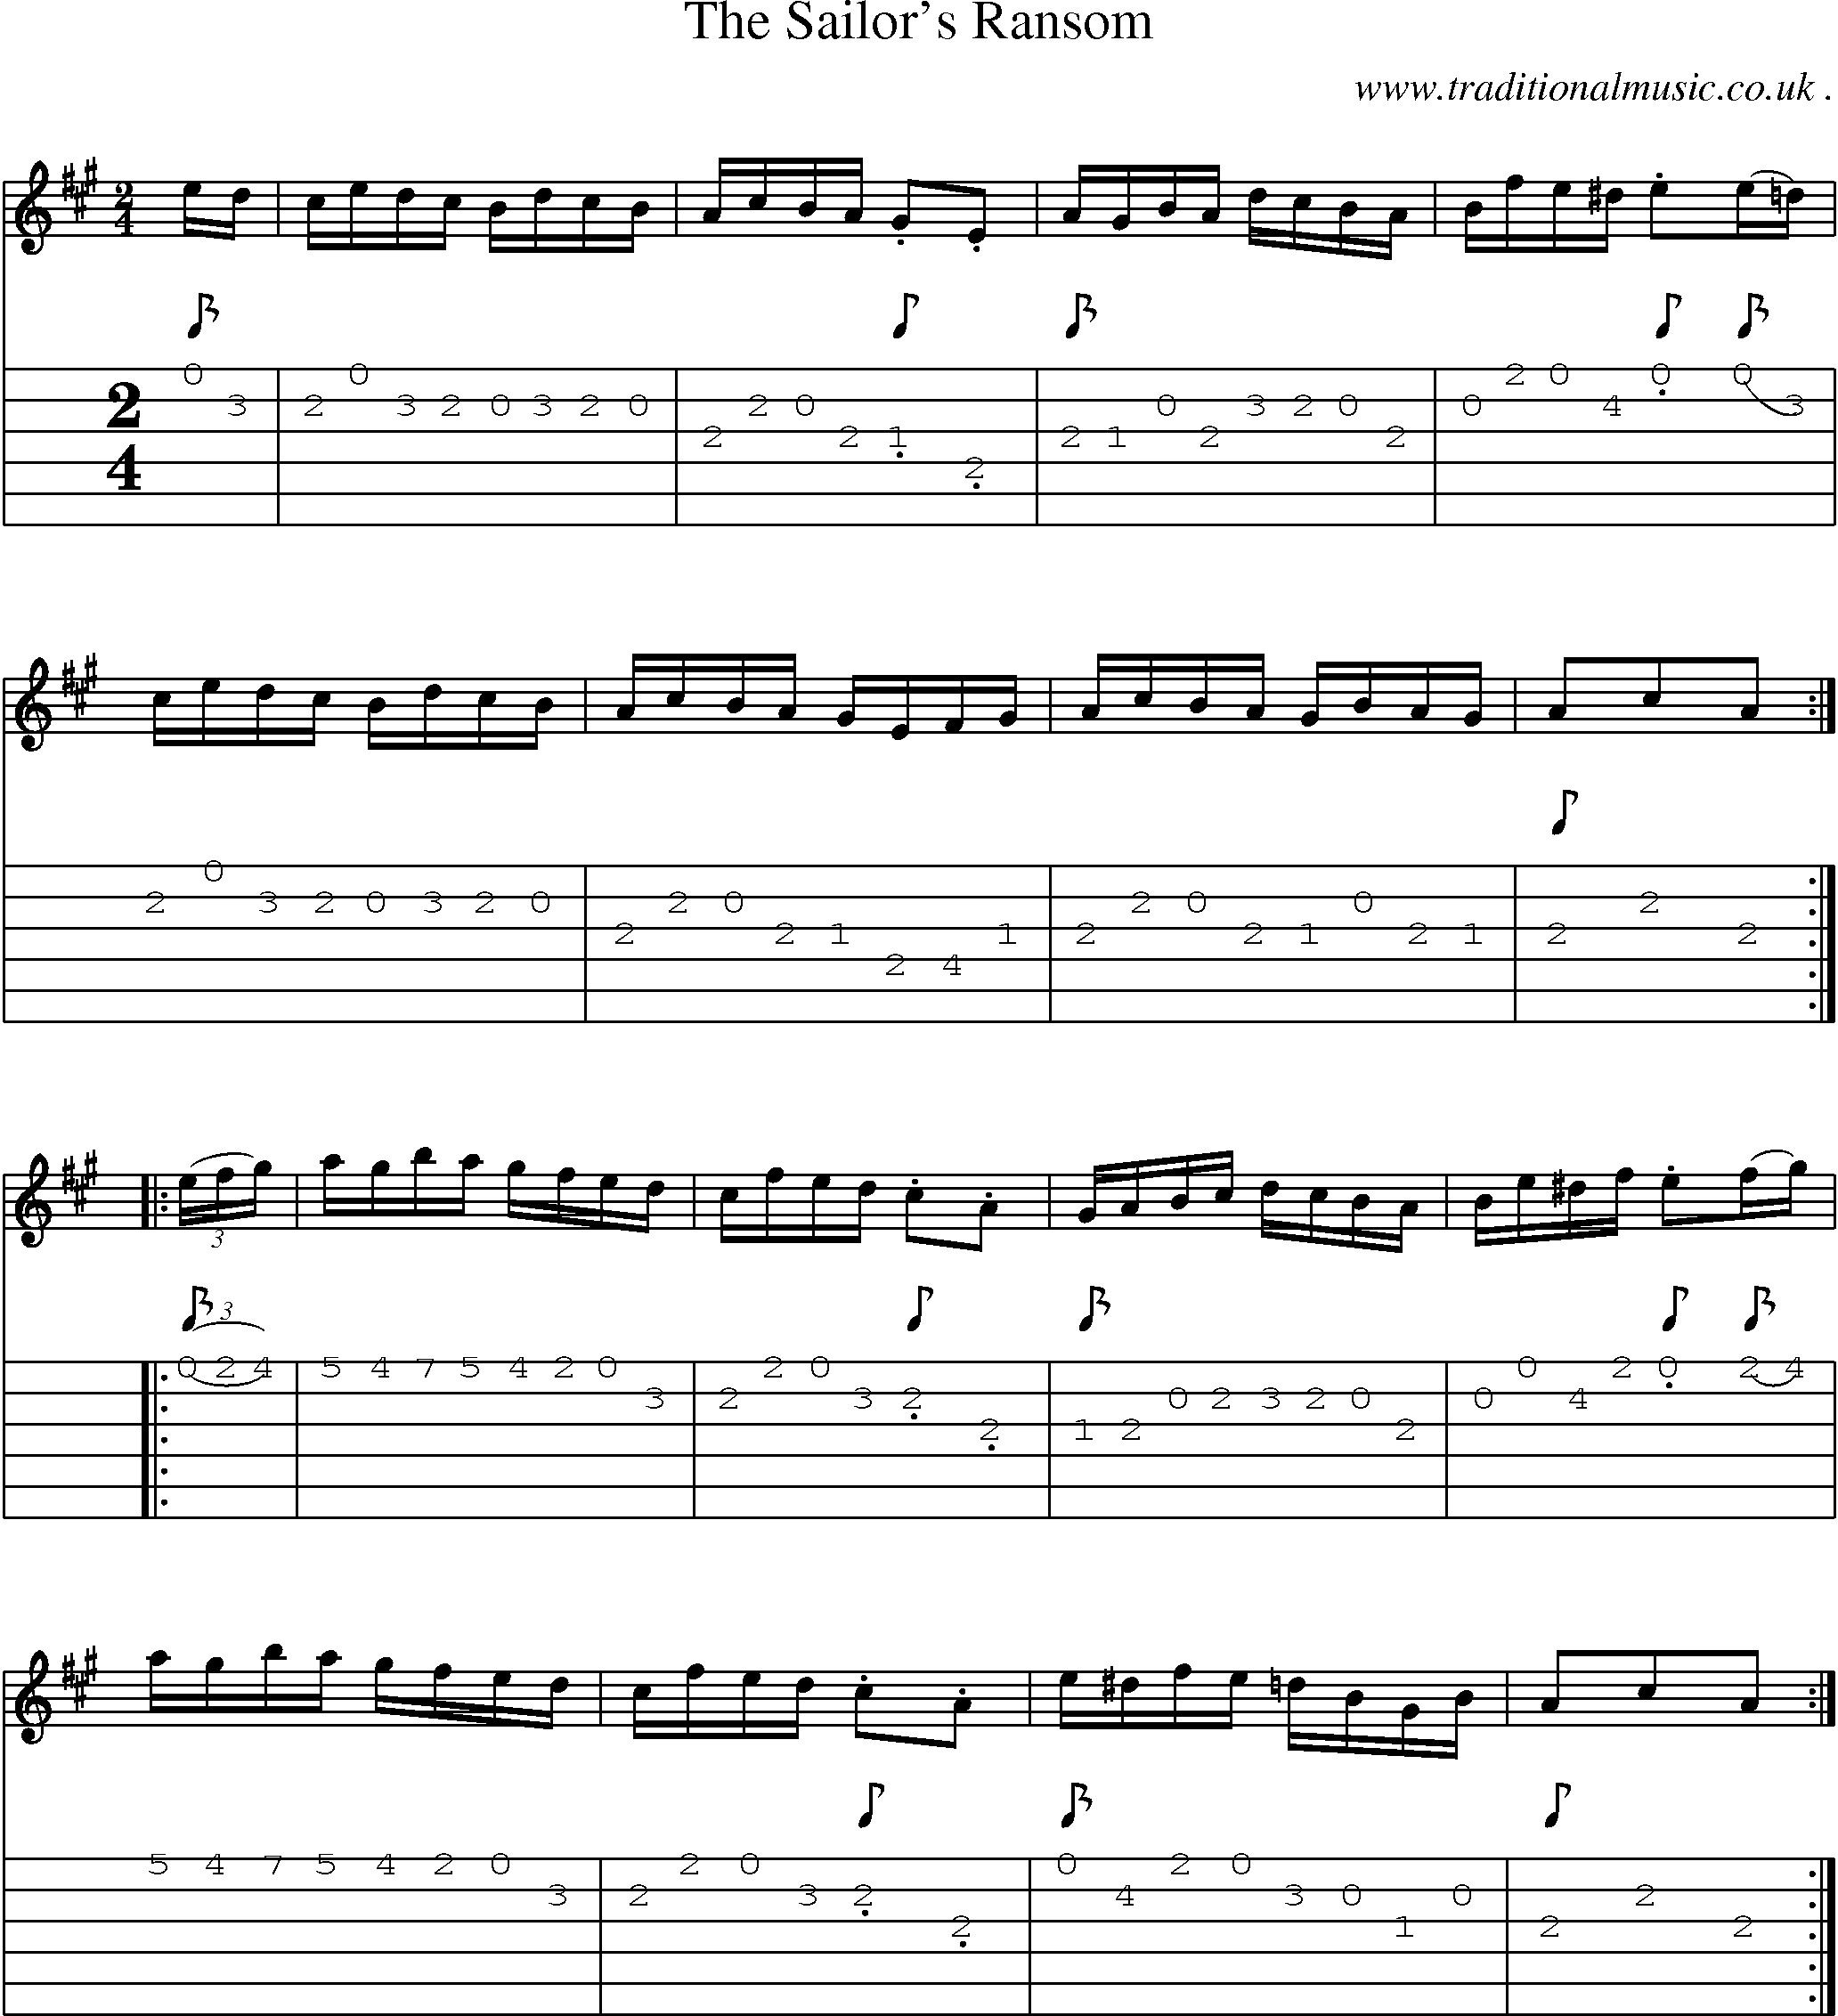 Sheet-Music and Guitar Tabs for The Sailors Ransom